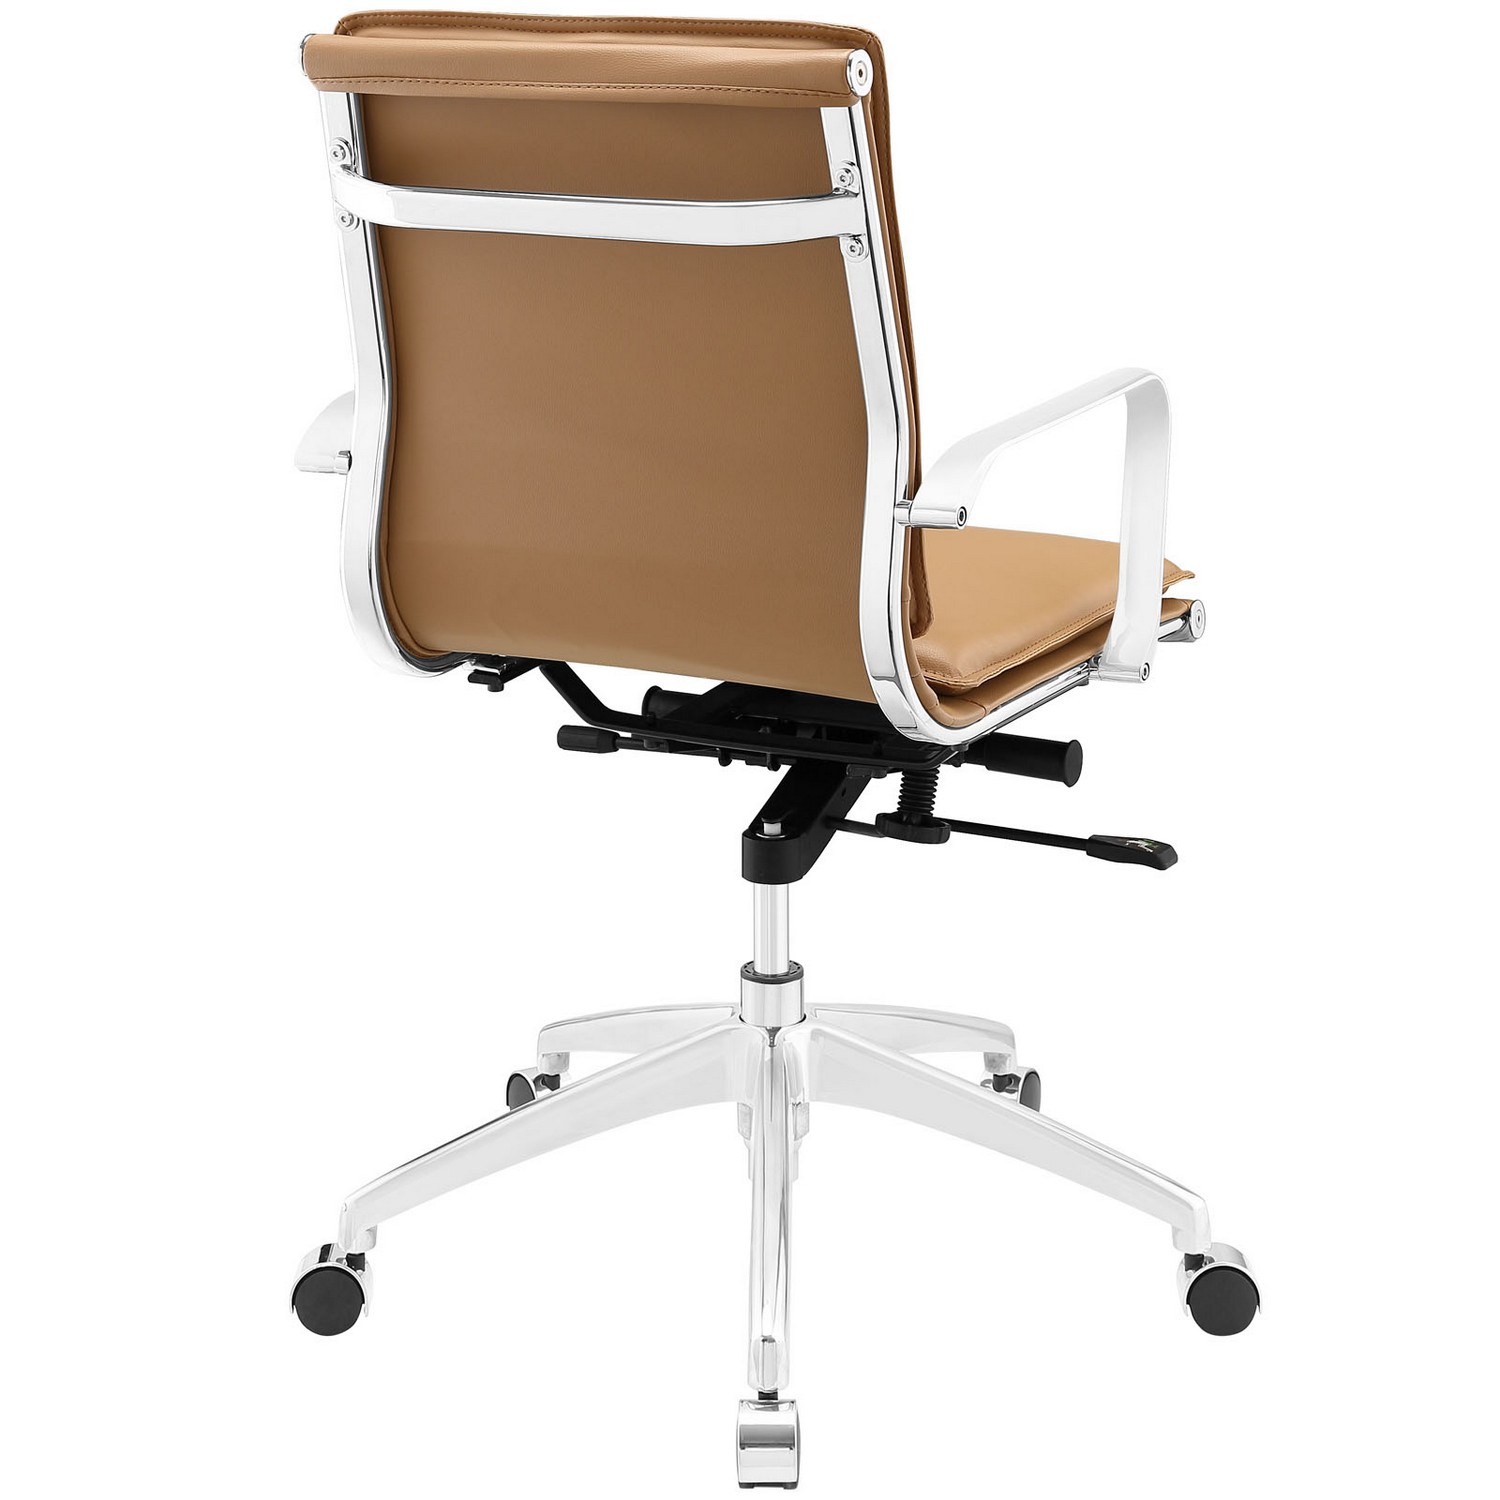 Modway Sage Mid Back Office Chair - Tan